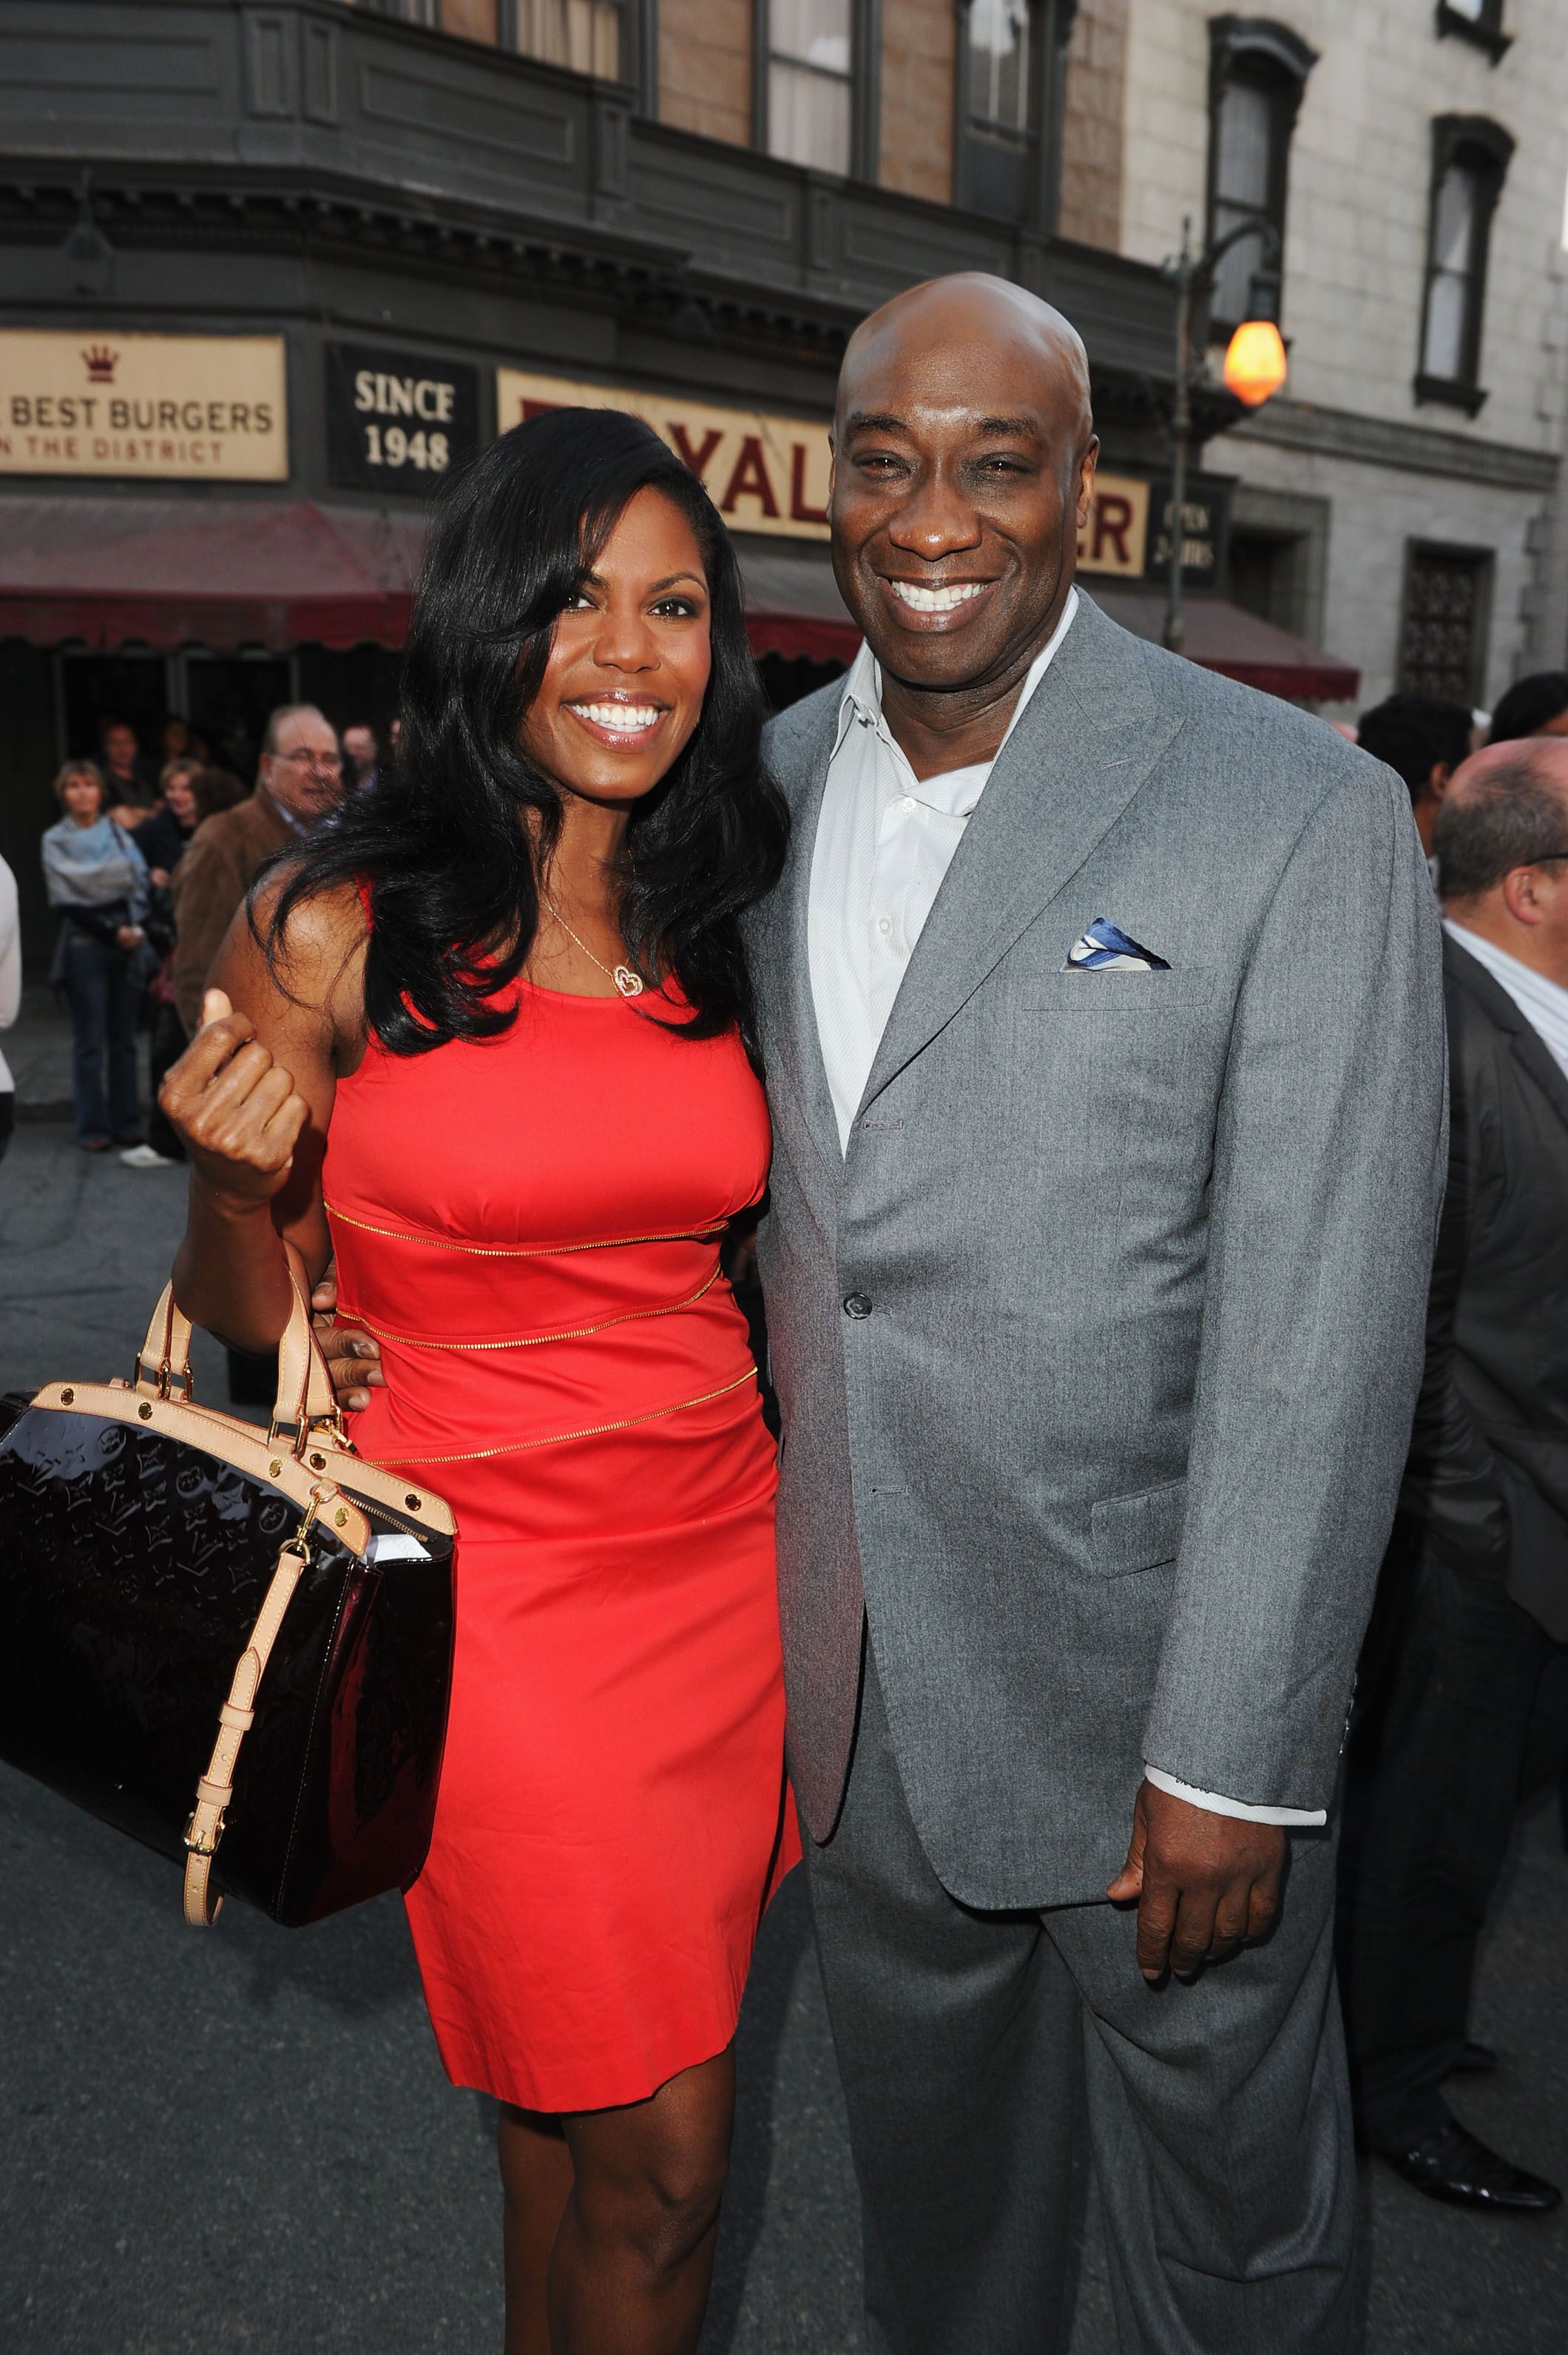 Michael Clarke Duncan embraces Omarosa Manigault on May 26, 2011, in Century City, California | Source: Getty Images